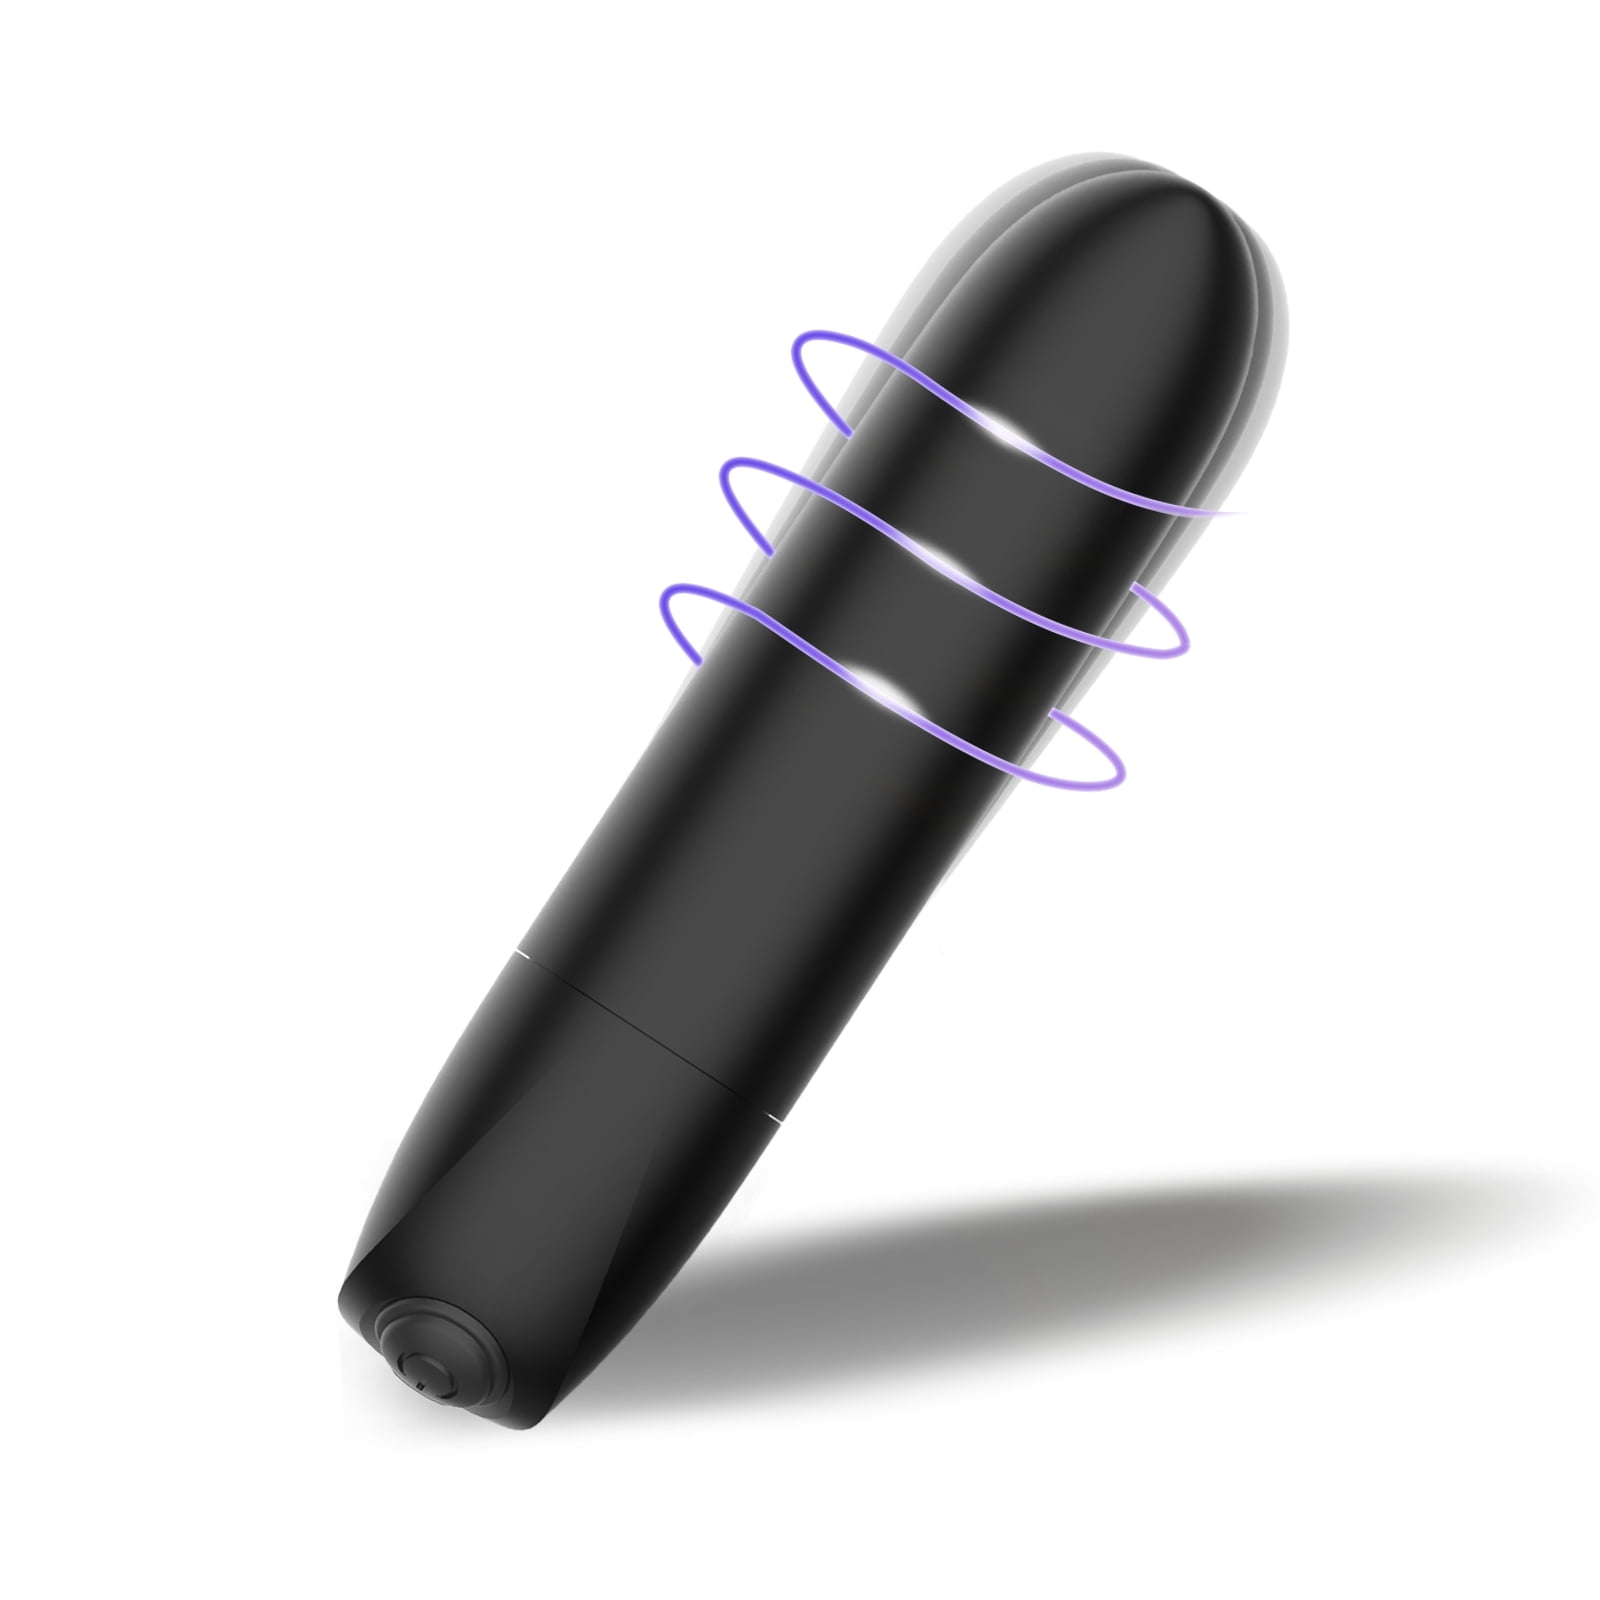 Tracys Dog Bullet Vibrator for Clitoral G-Spot Stimulation with 19 Vibration Modes, Rechargeable Vaginal Anal Massager Sex Toys for Women pic